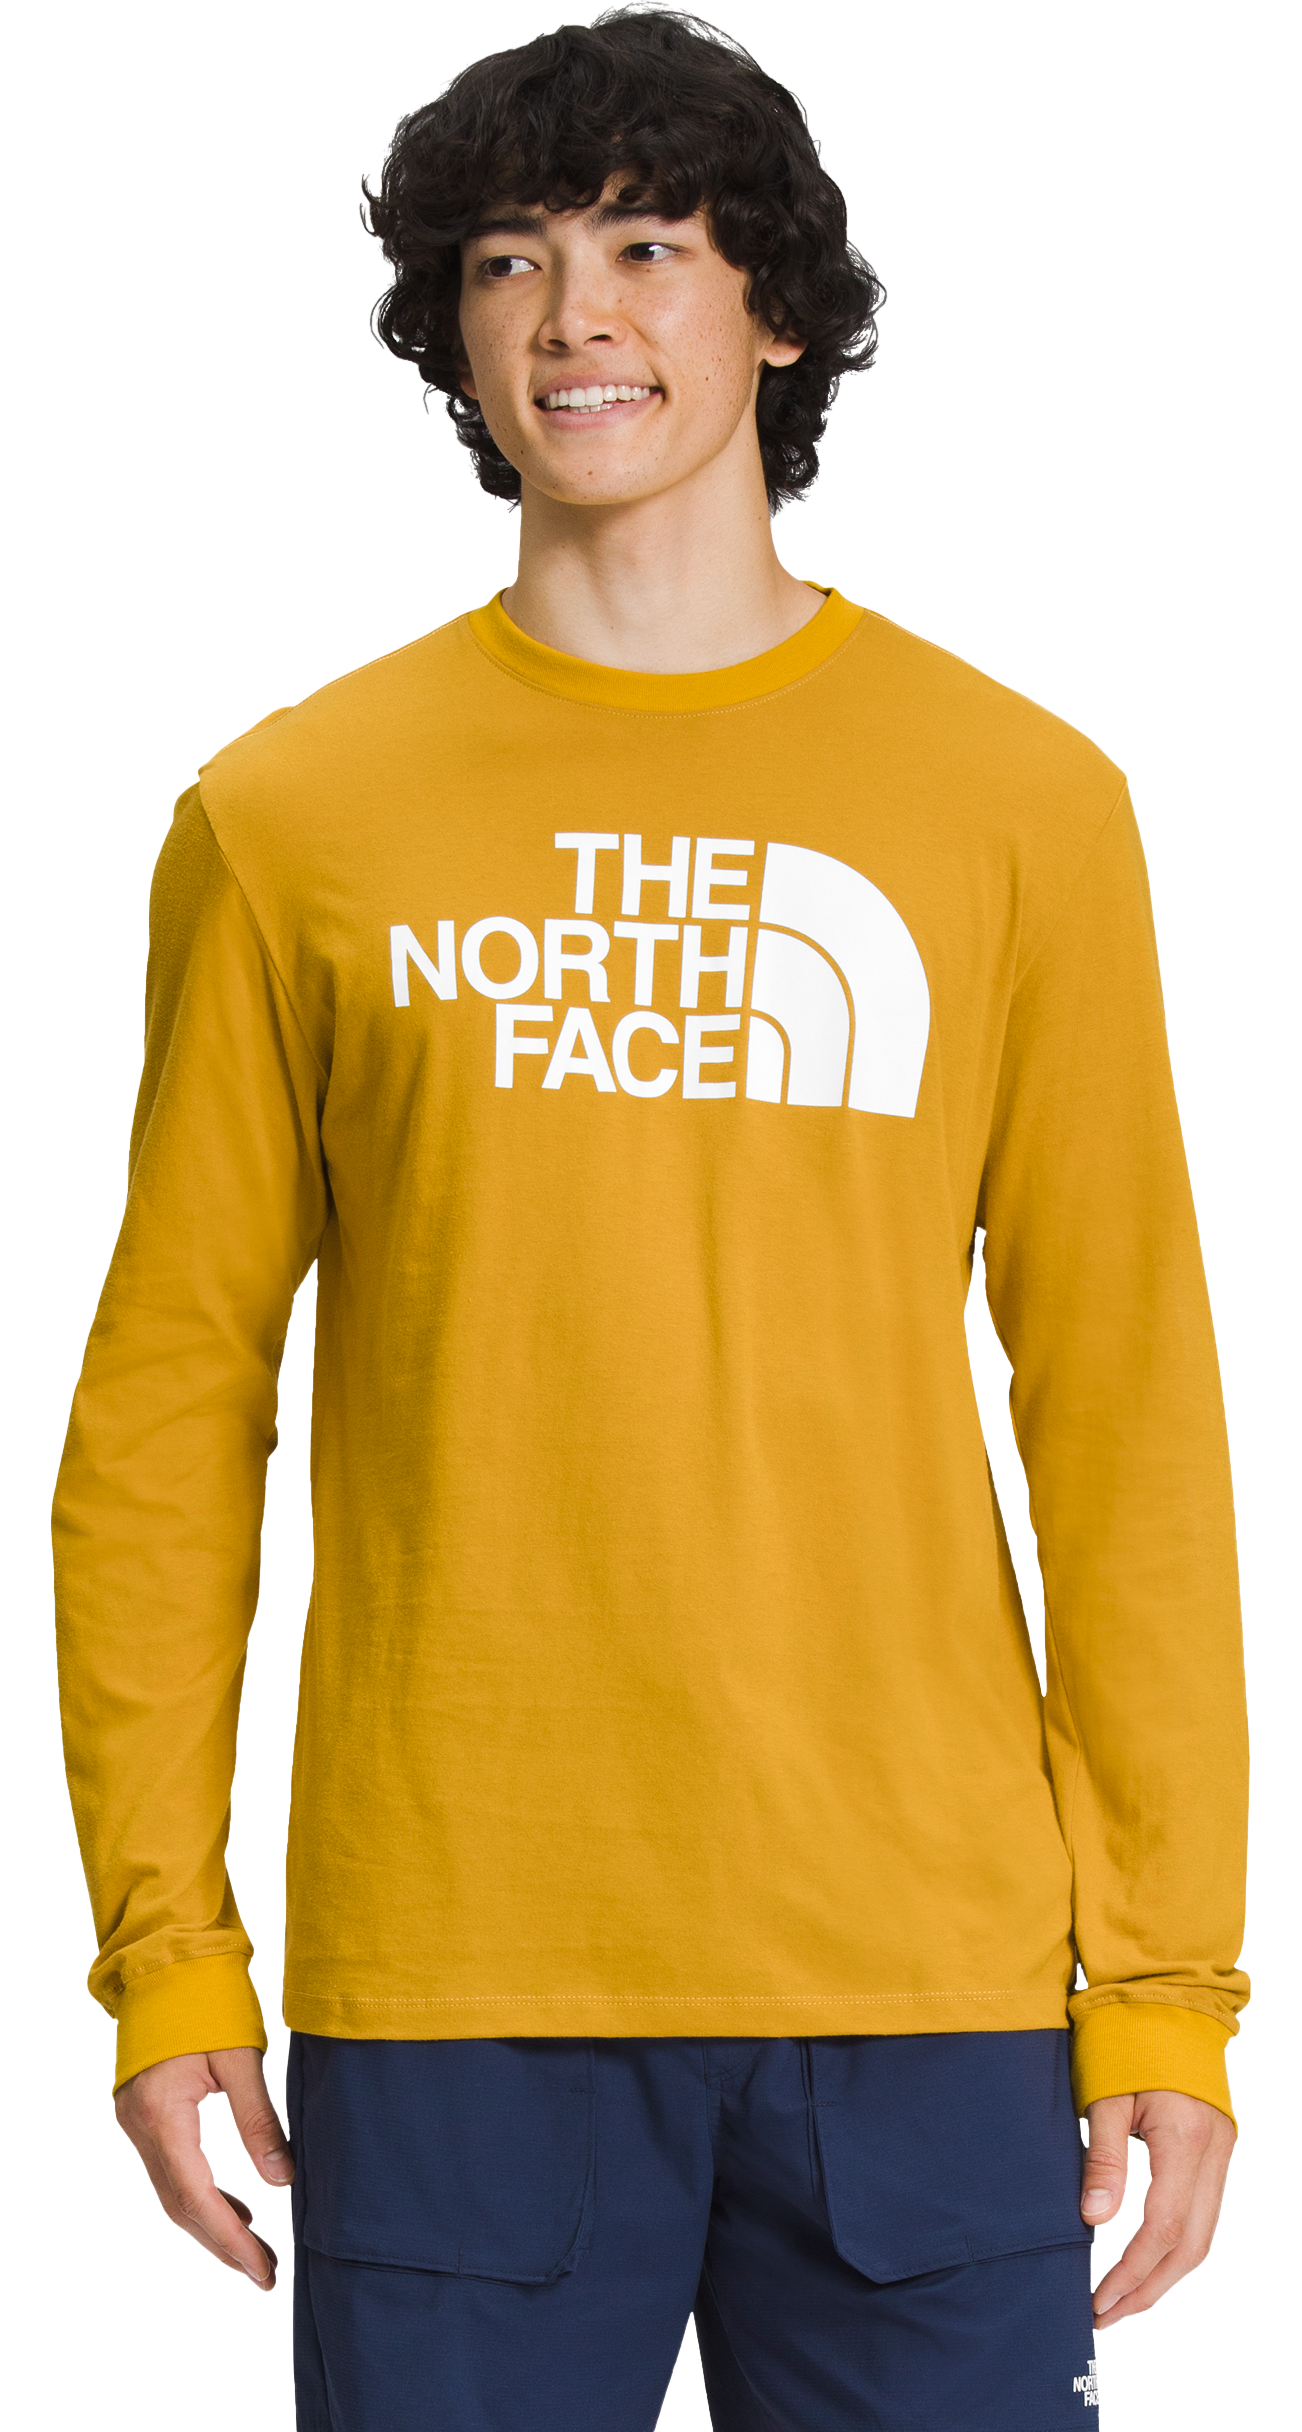 The North Face Half Dome Long-Sleeve T-Shirt for Men - Arrowwood Yellow/TNF White - M